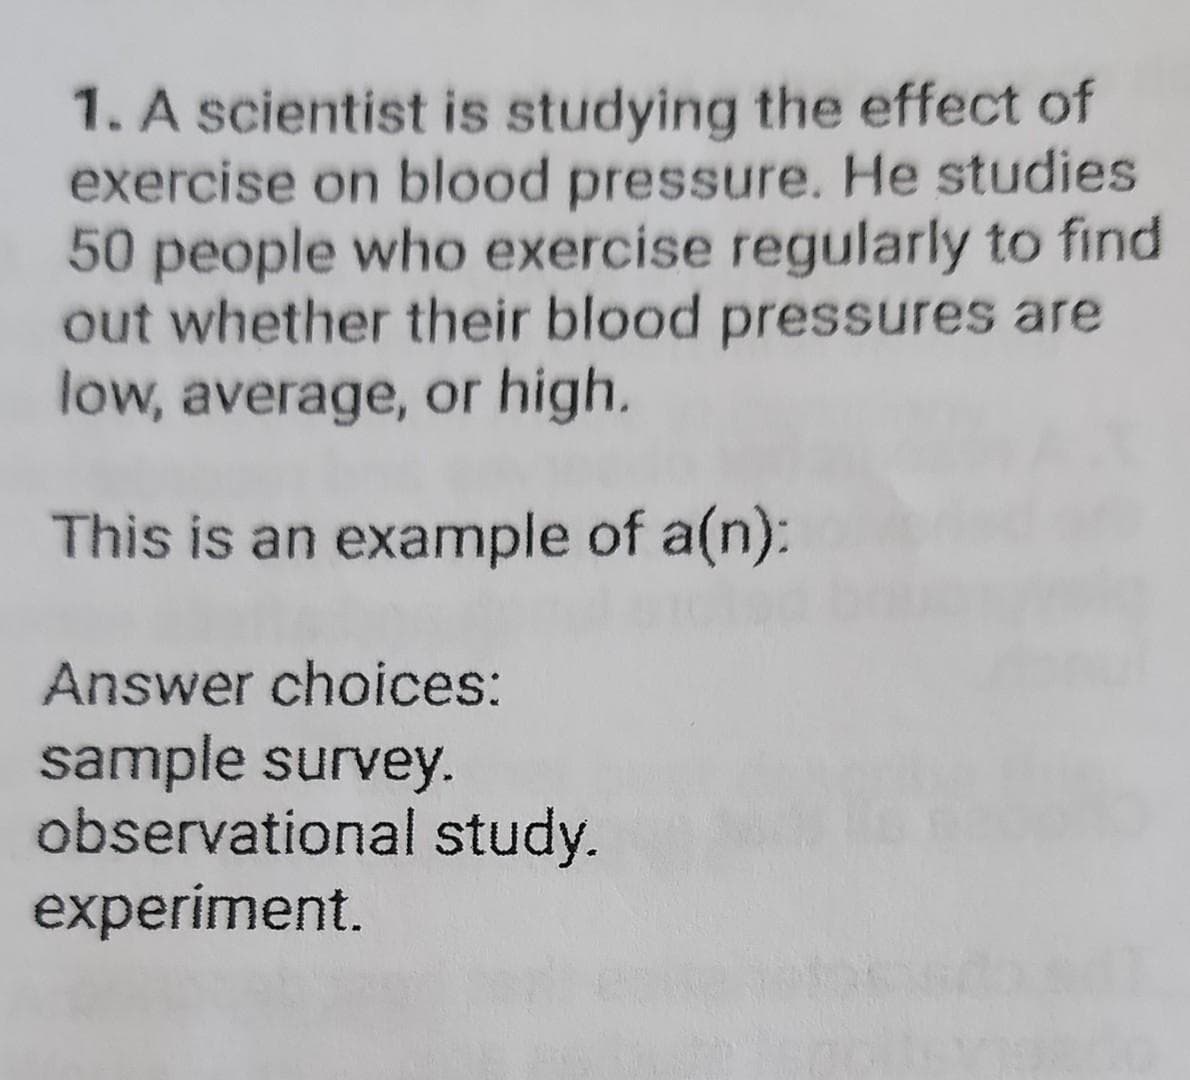 1. A scientist is studying the effect of
exercise on blood pressure. He studies
50 people who exercise regularly to find
out whether their blood pressures are
low, average, or high.
This is an example of a(n):
Answer choices:
sample survey.
observational study.
experiment.